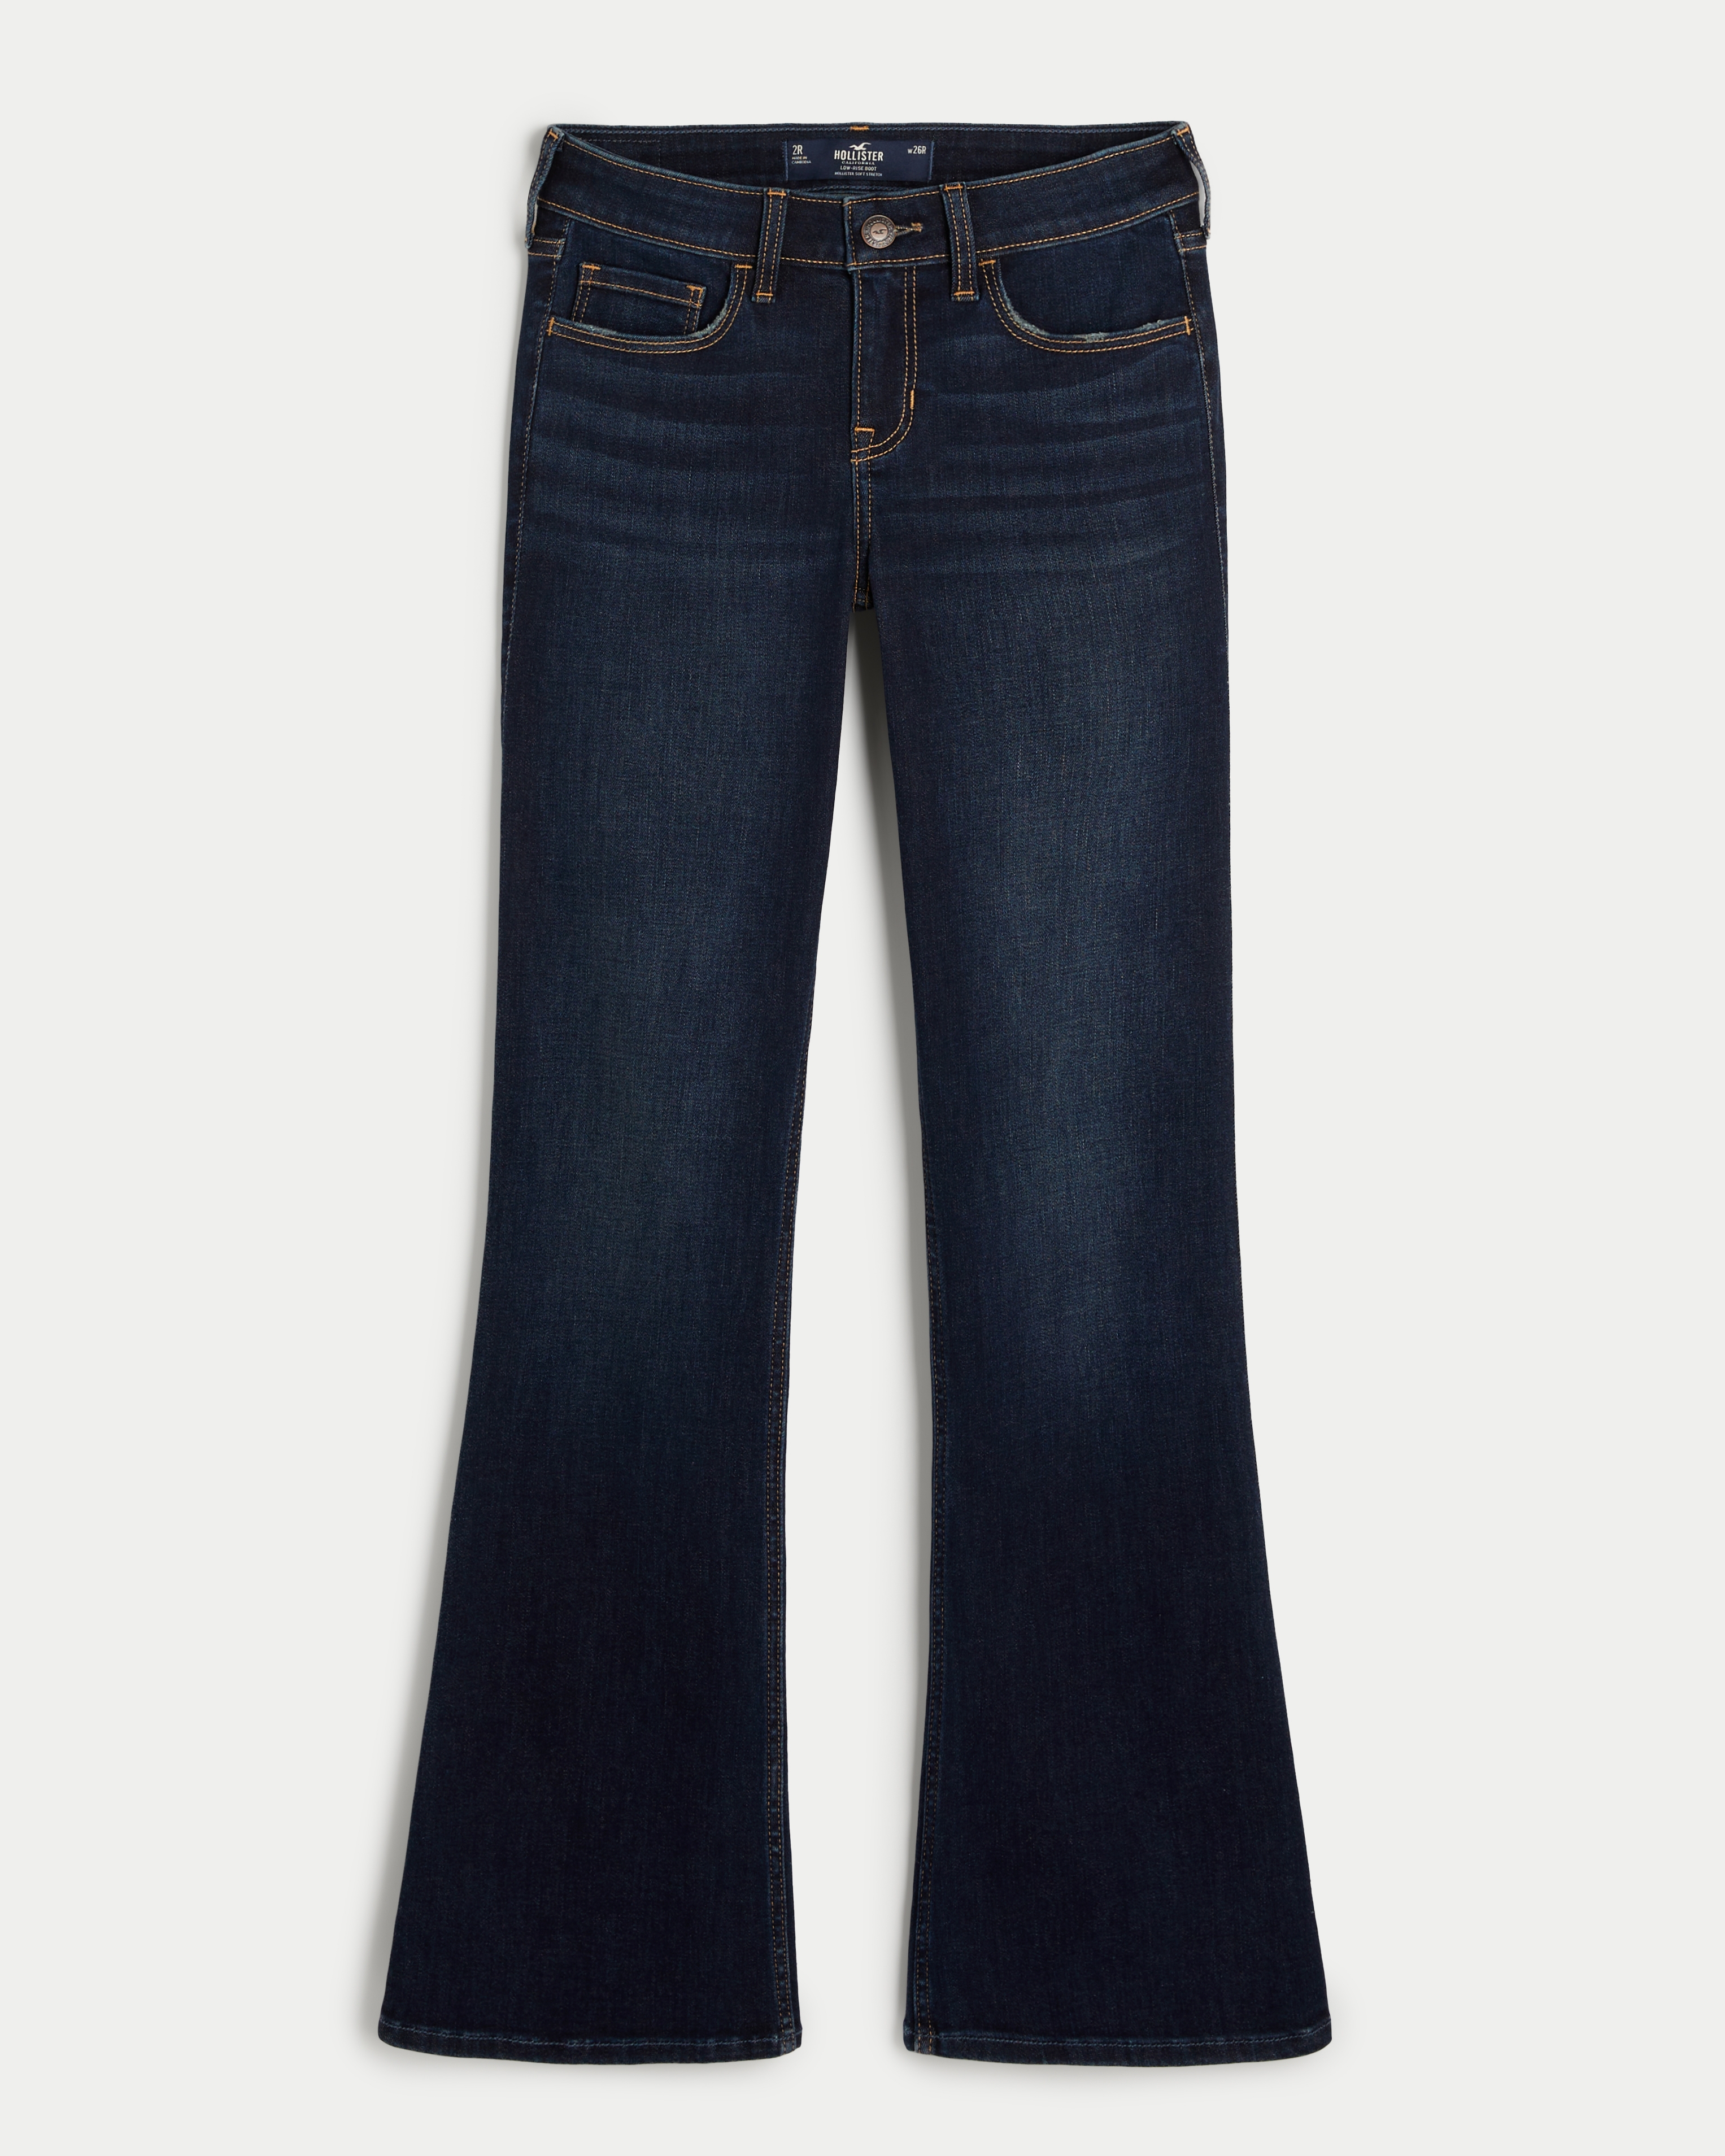 Low-Rise Dark Wash Boot Jeans